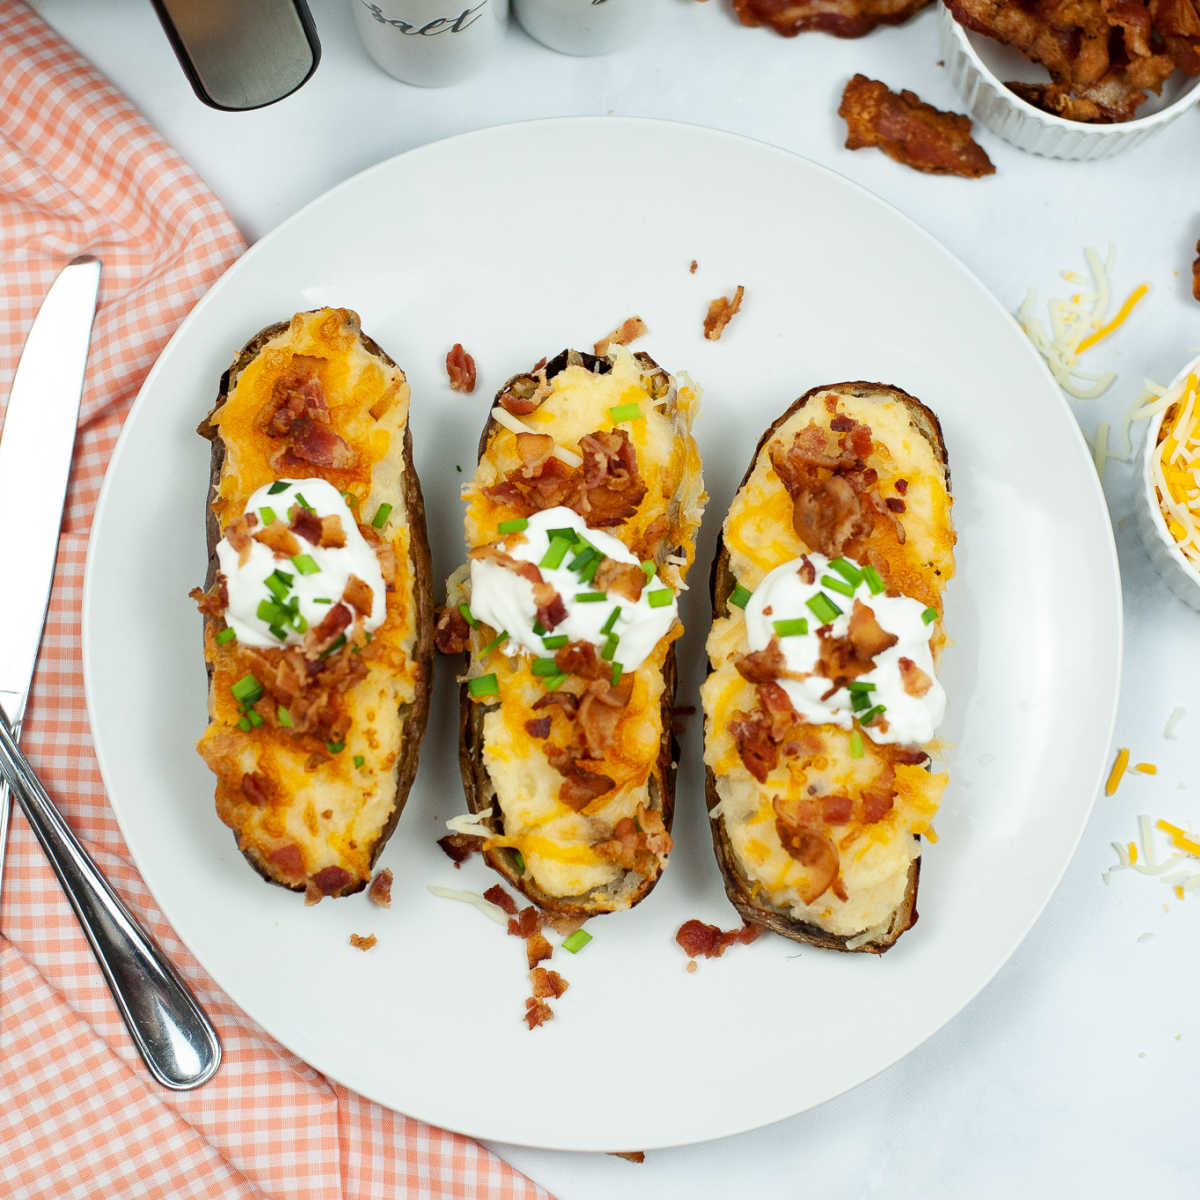 Top down view of three twice baked potatoes on a plate.